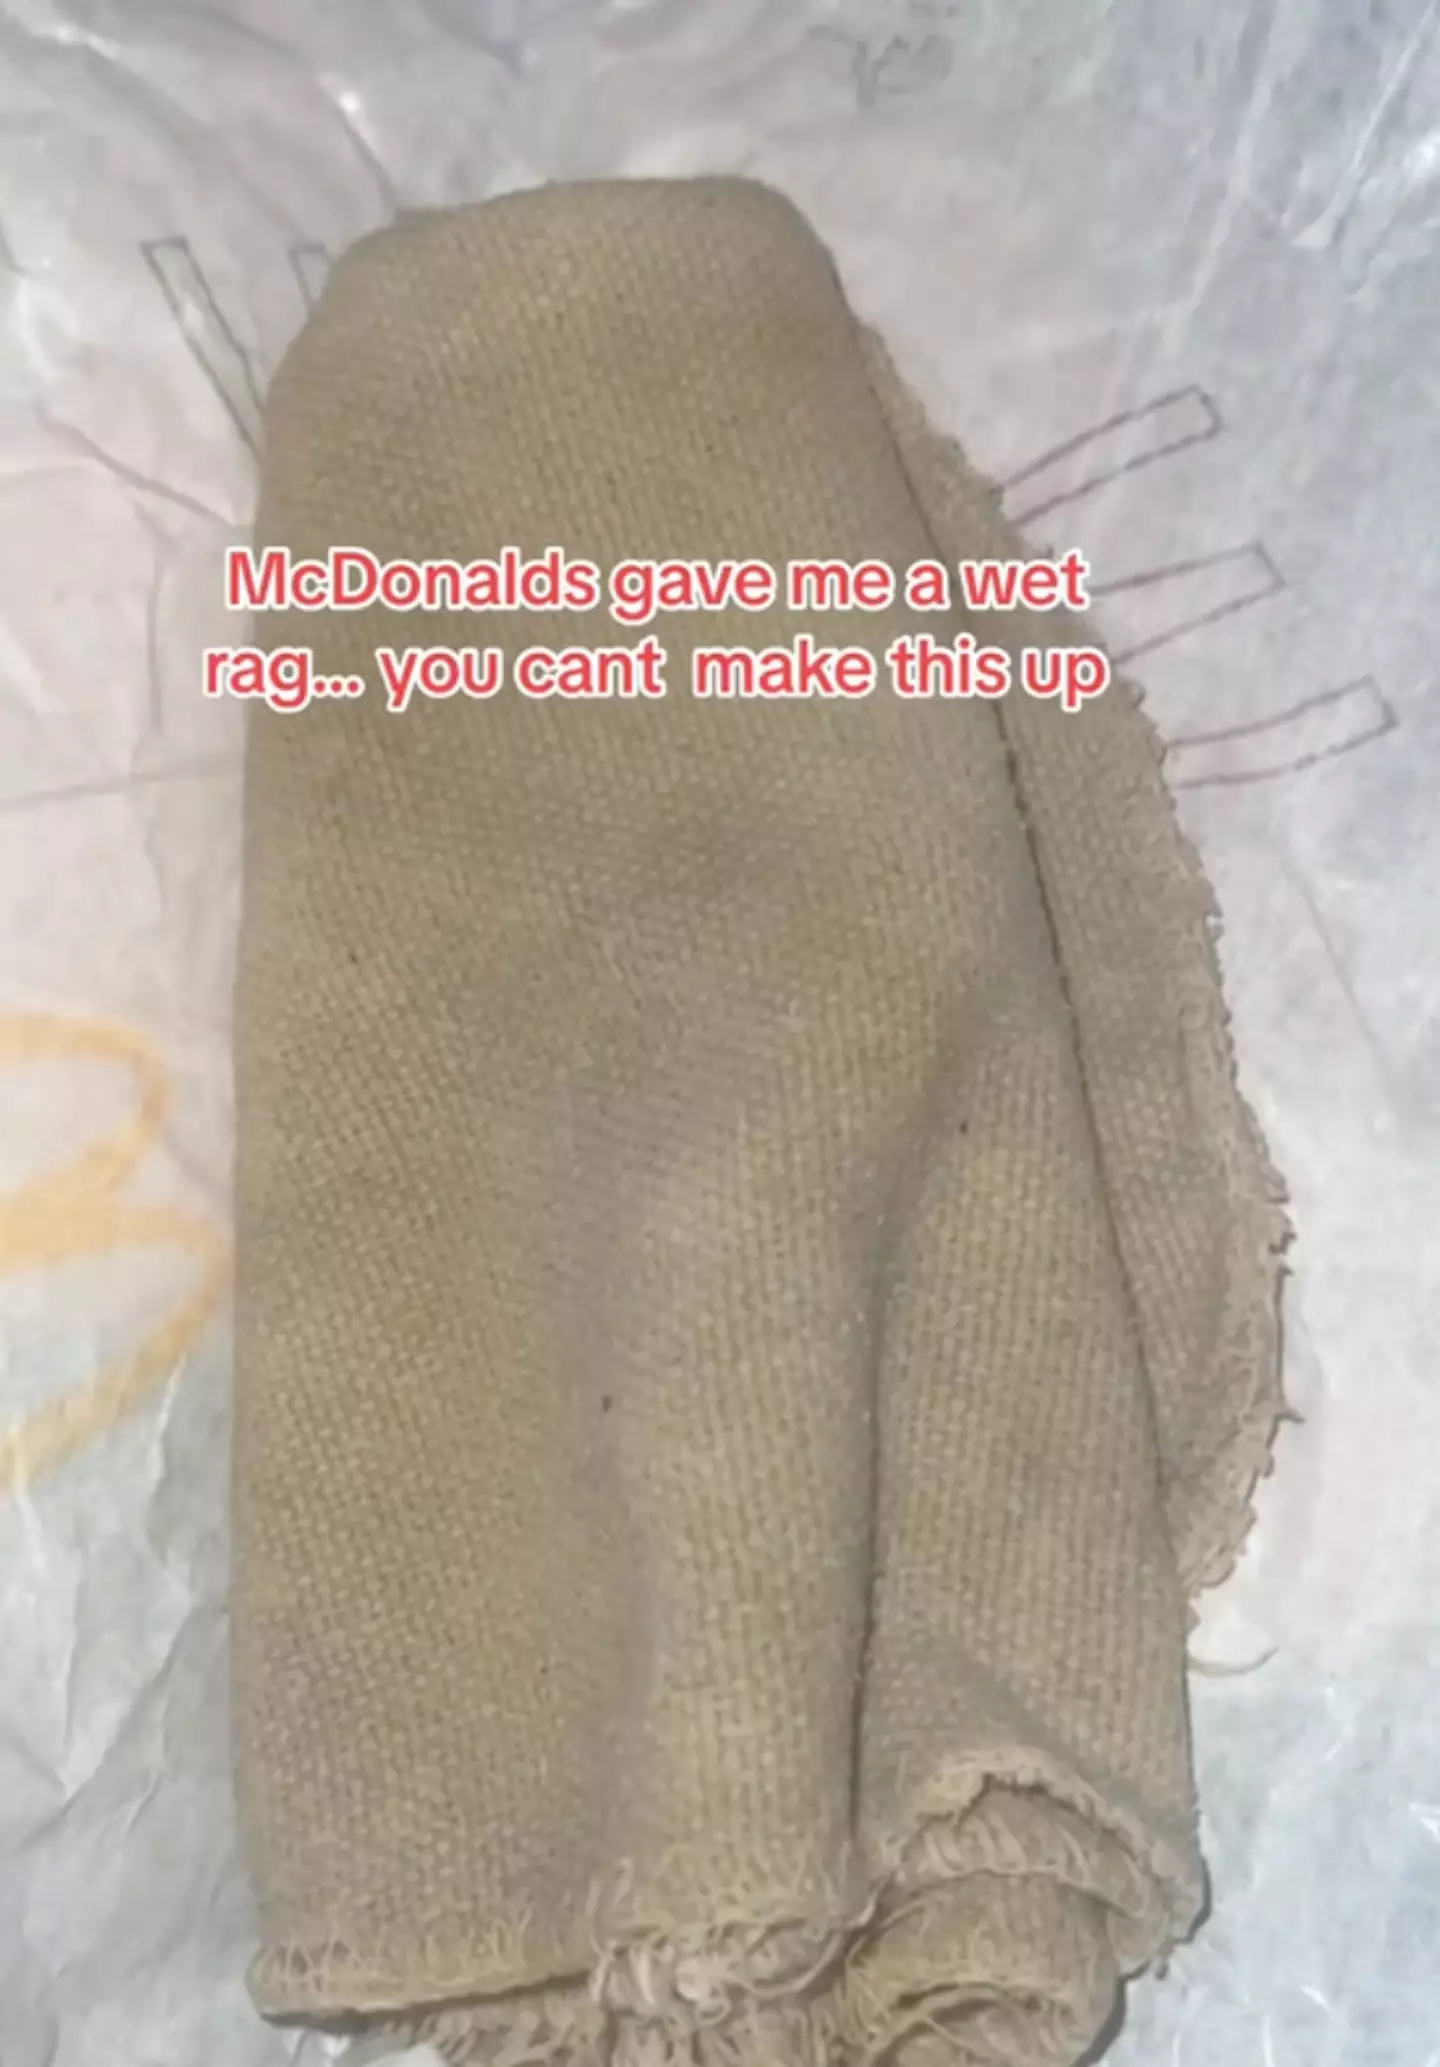 A TikToker claims they opened up their McDonald's order to find a wet rag.